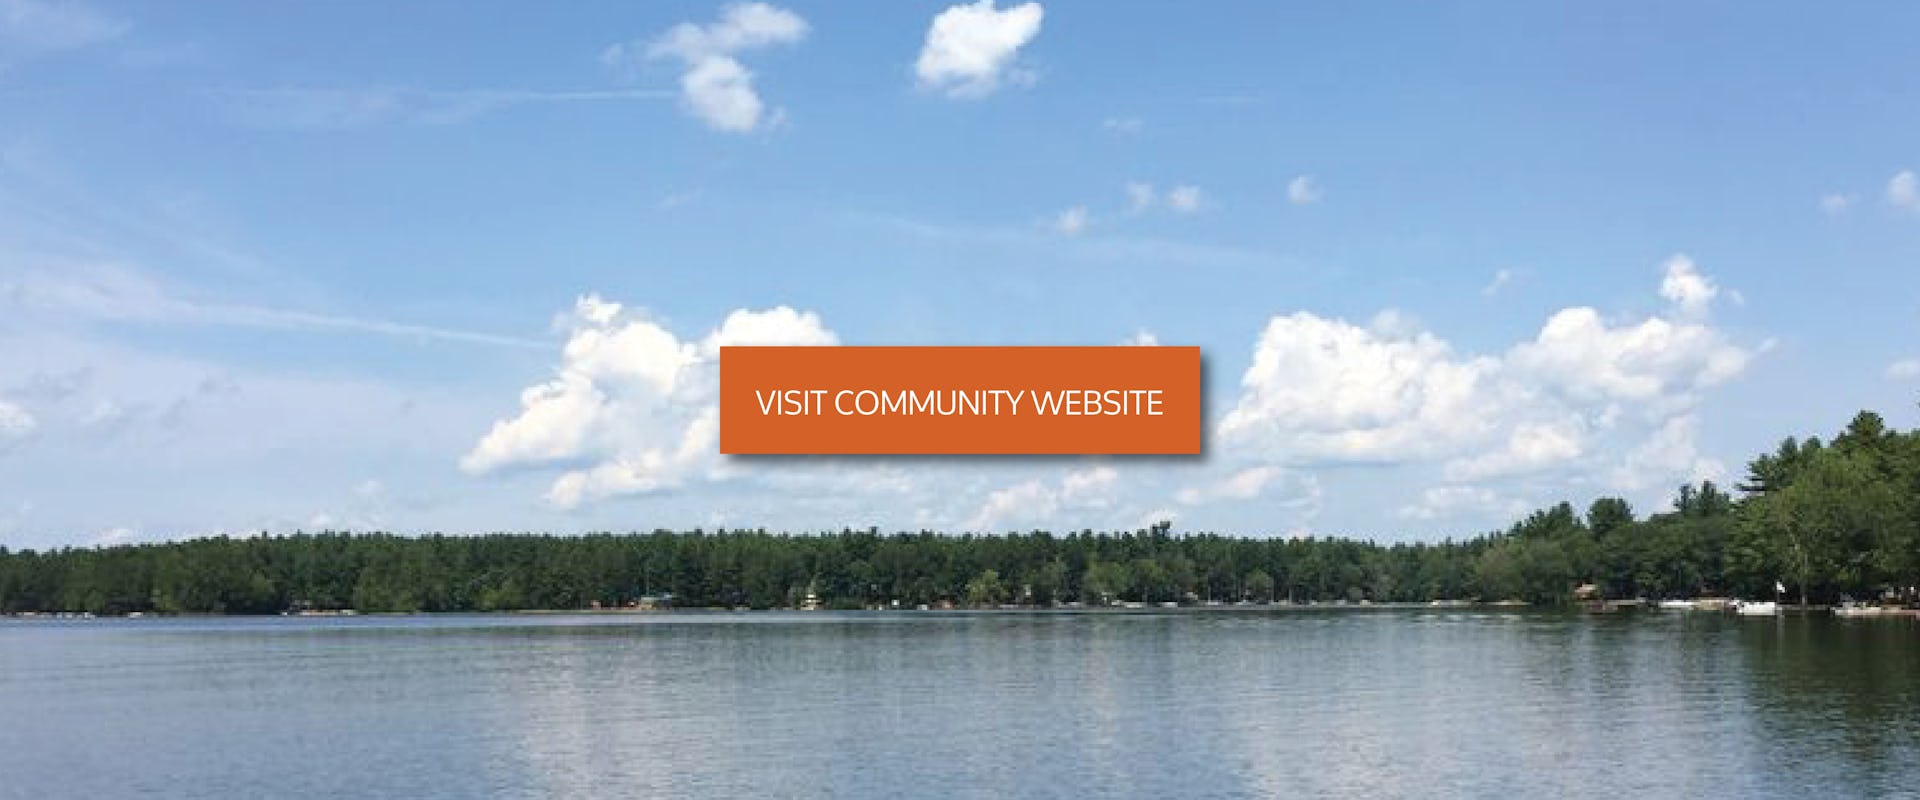 pond with visit community website button